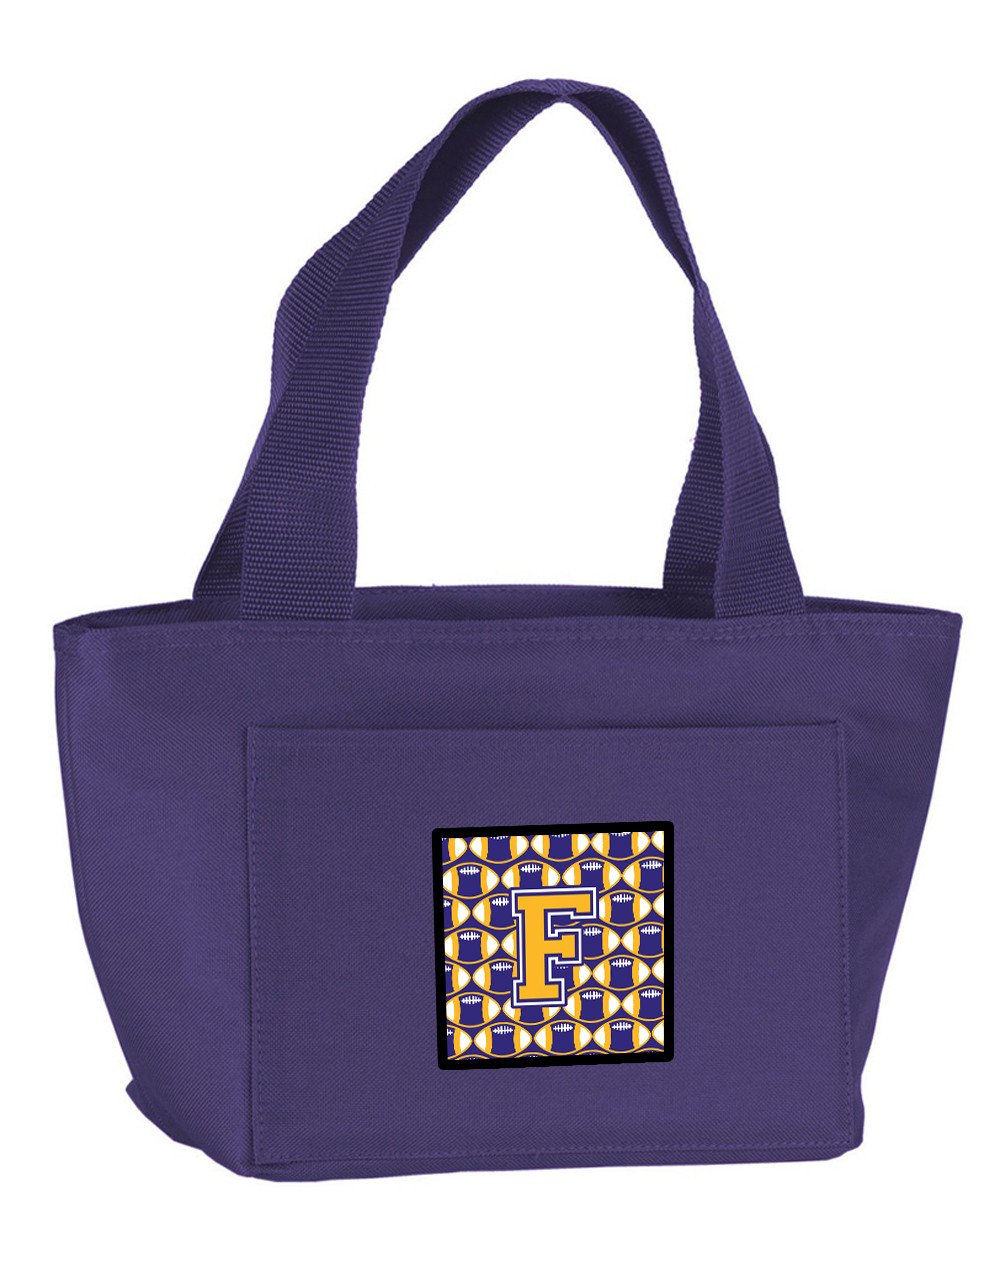 Letter F Football Purple and Gold Lunch Bag CJ1064-FPR-8808 by Caroline's Treasures